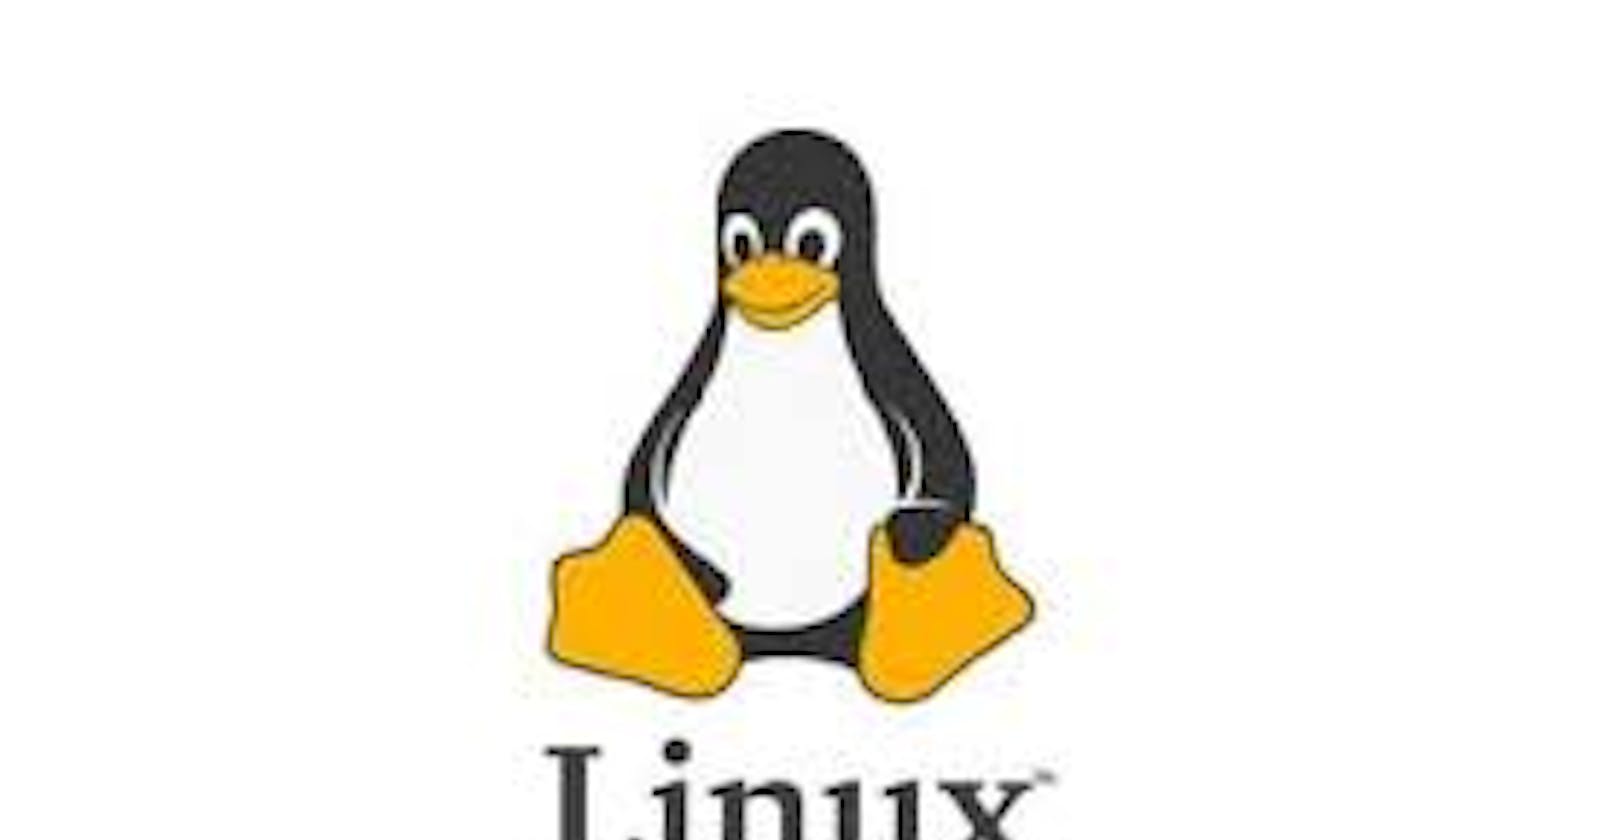 Useful Tools & Commands in Linux (To be updated)